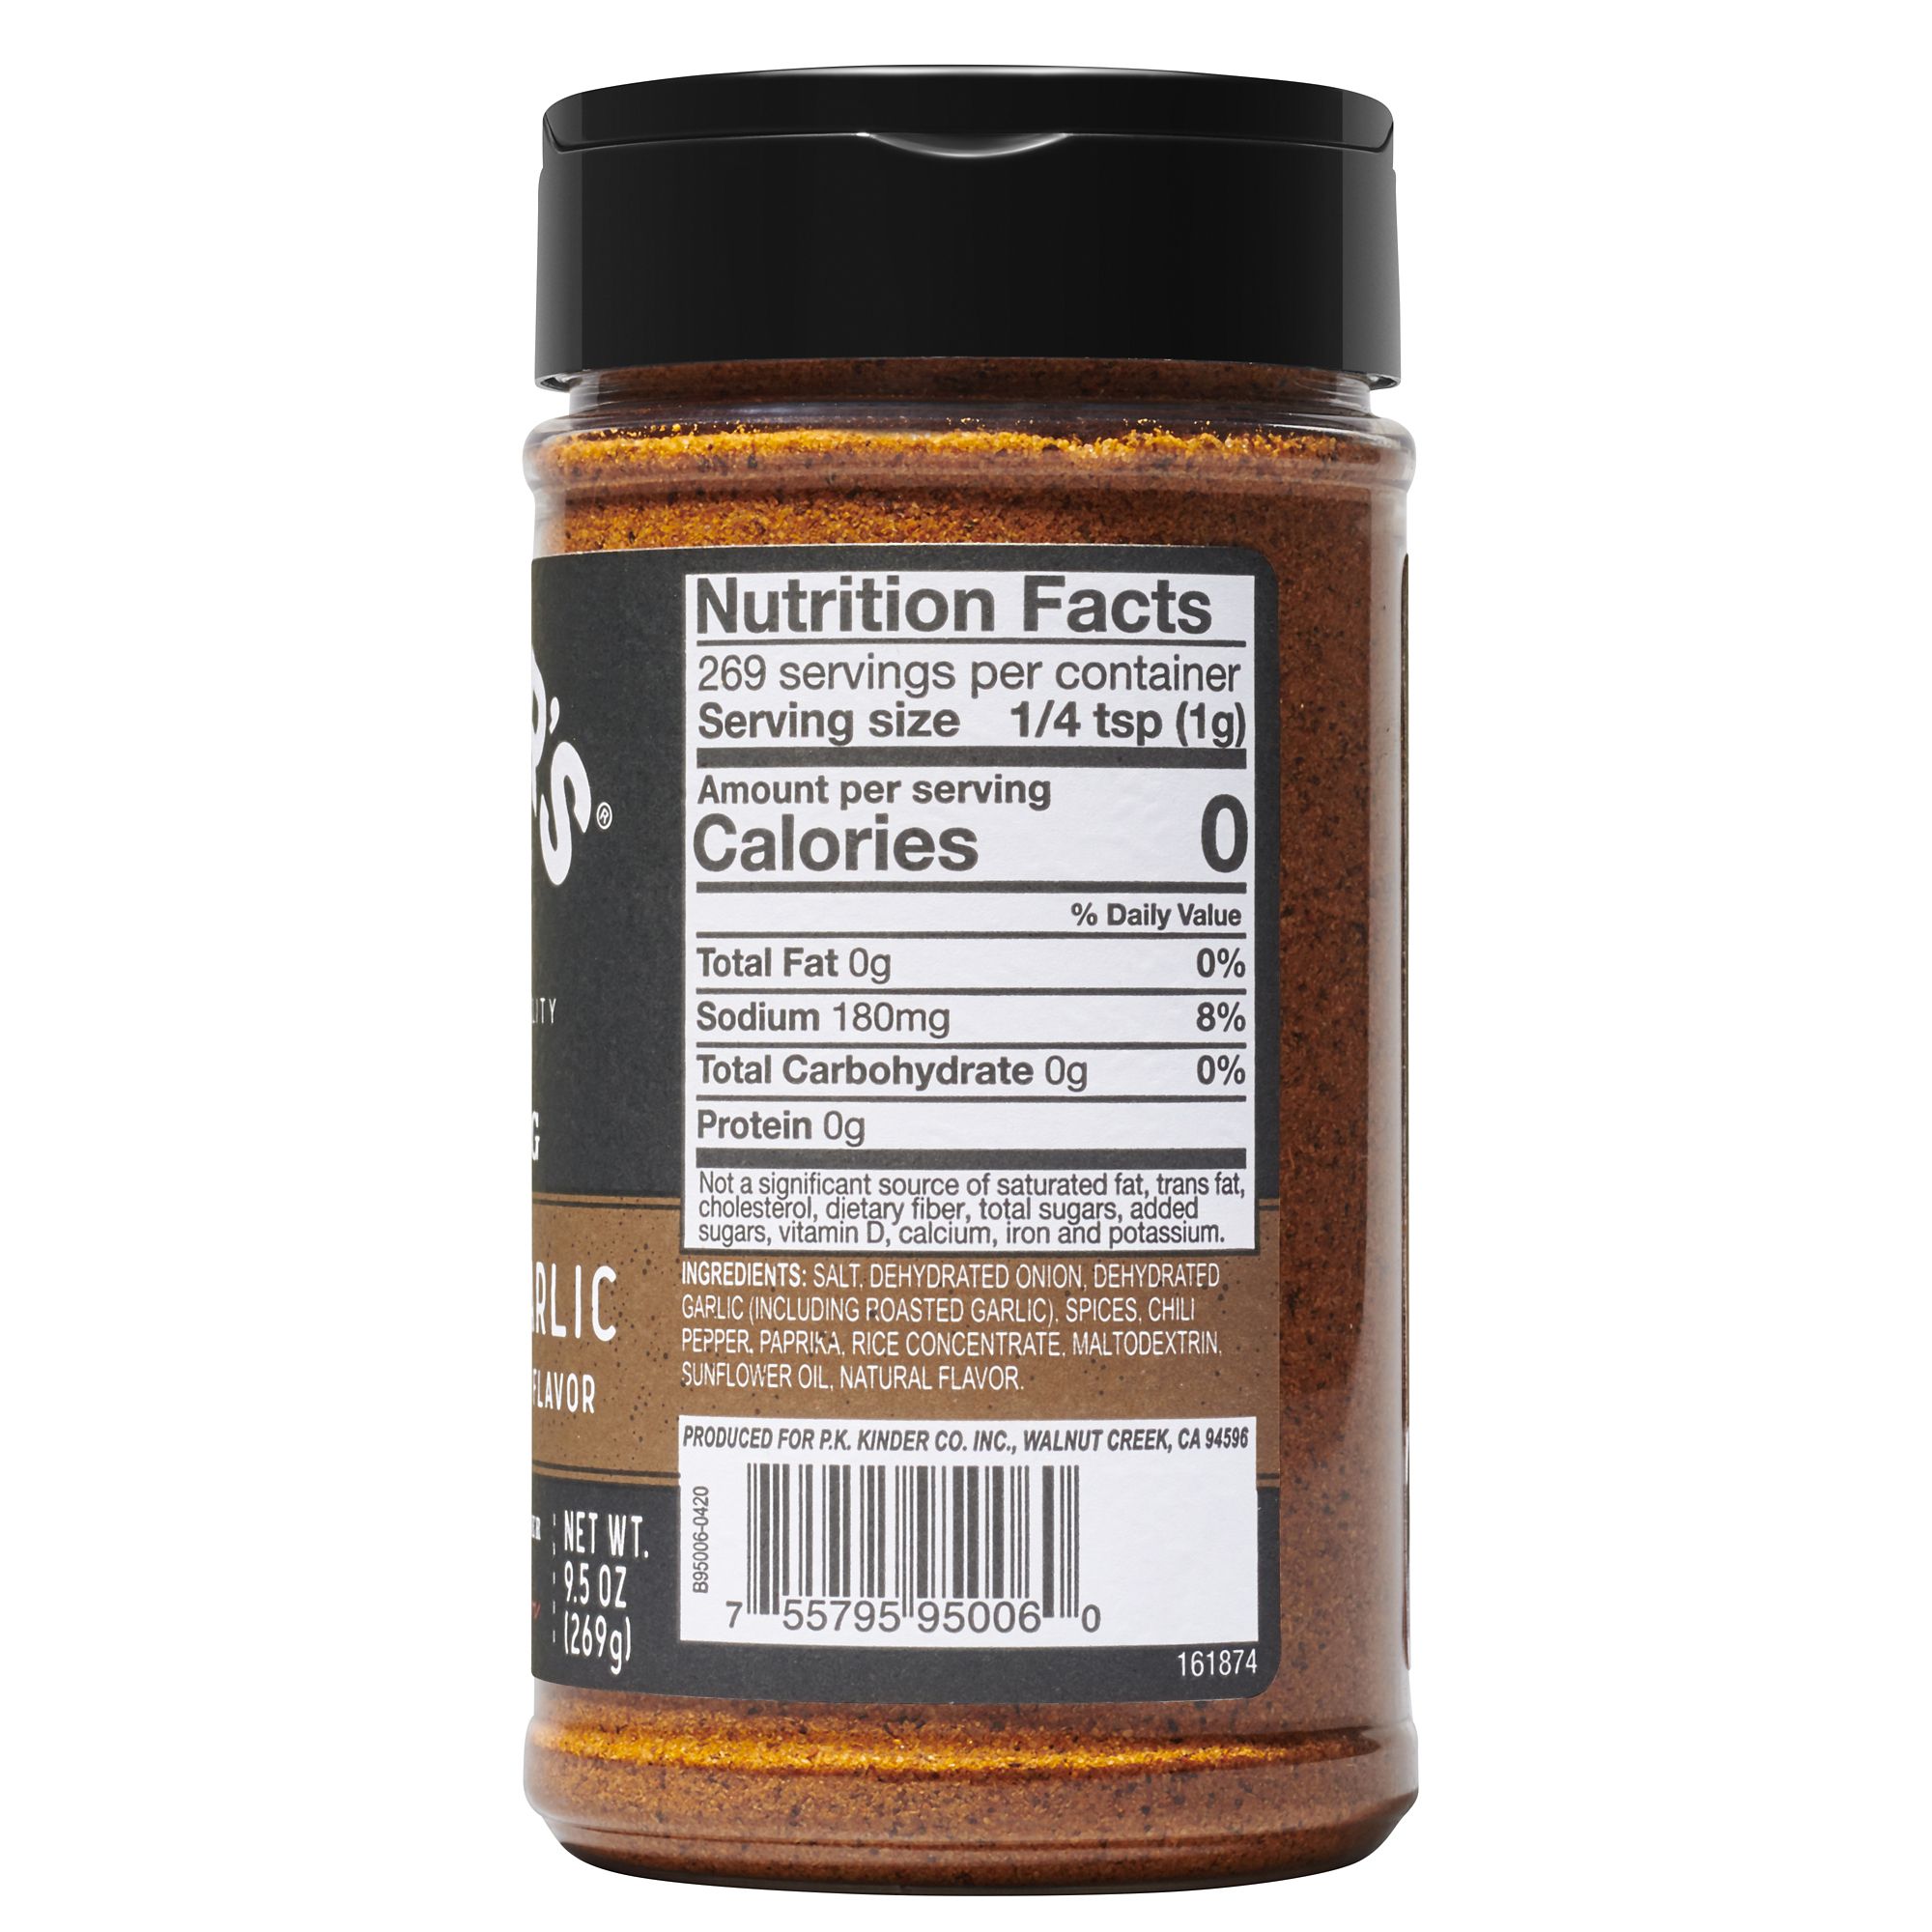 FLAVOUR BOMB™ COUNTRY HERBFLAVOURED CONCENTRATE – Deli Spices